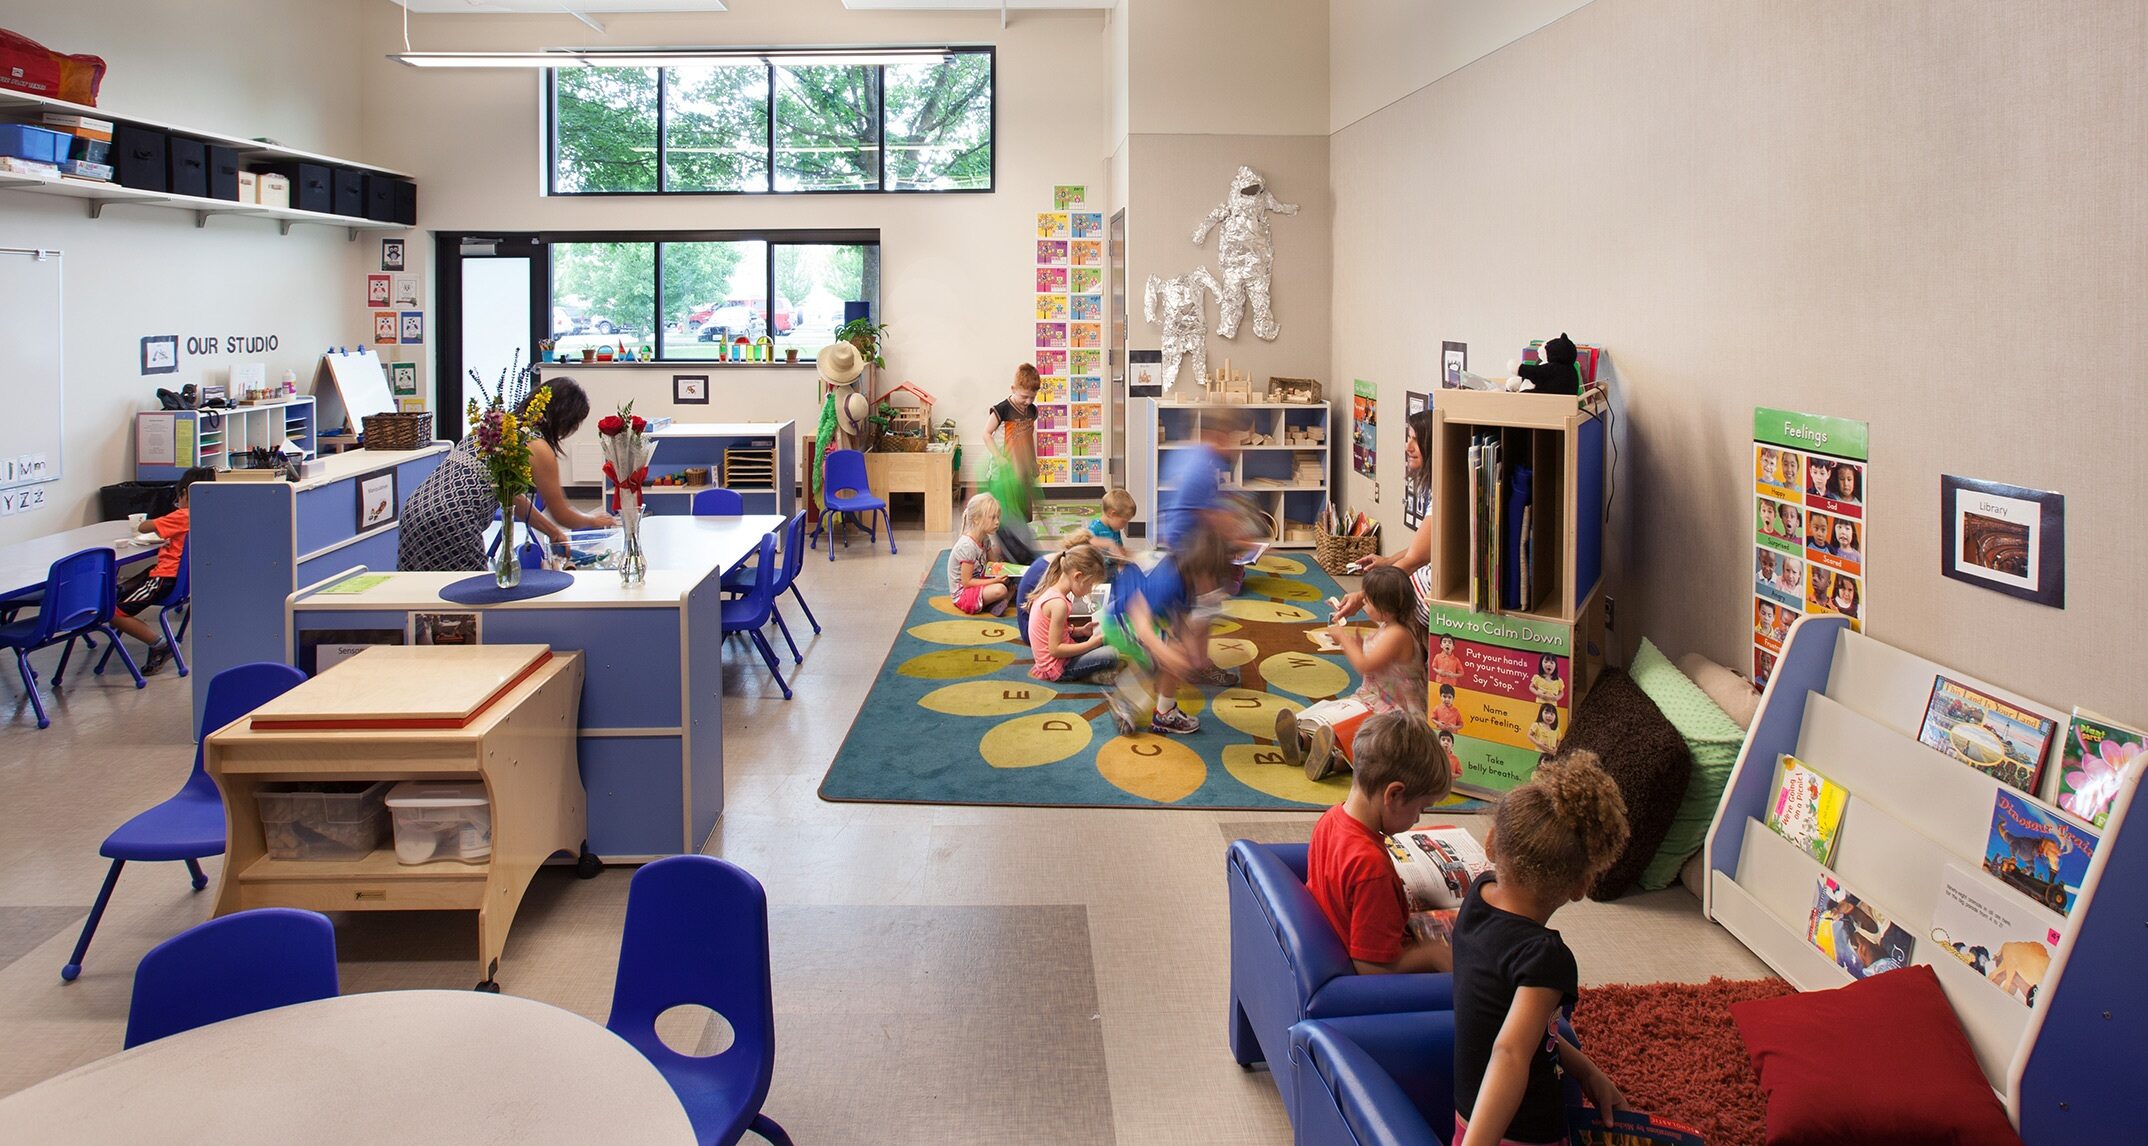 Communal spaces at Central Valley Early Learning Center enable teachers to observe the activities from a distance, while allowing students to exercise choice, build independence, and create a sense of ownership. — NAC